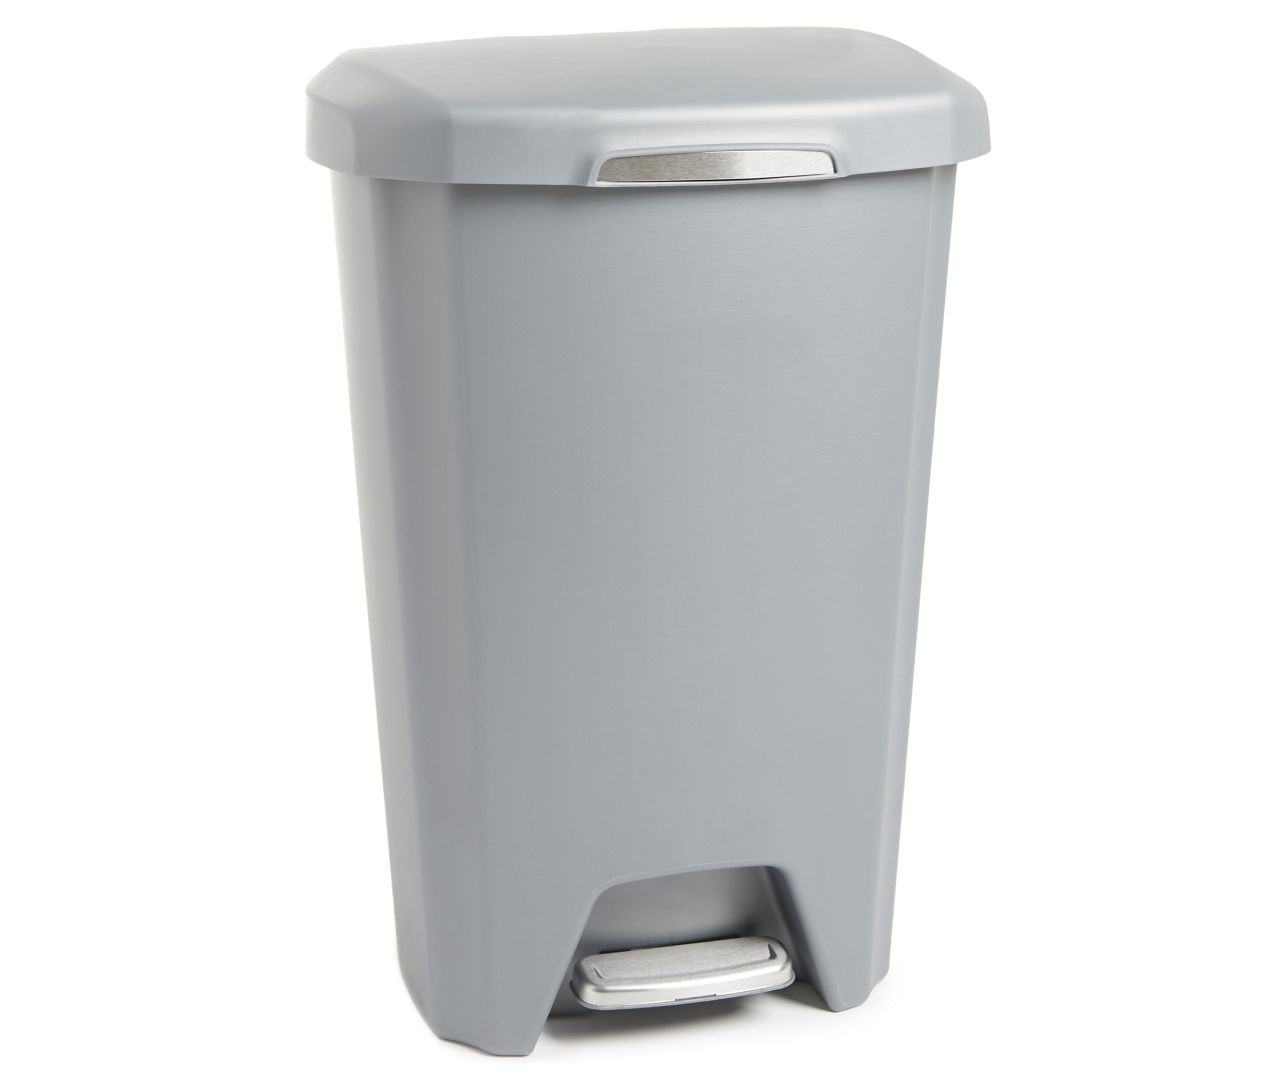 Stainless Steel 13-Gallon Kitchen Trash Can with Step Lid in